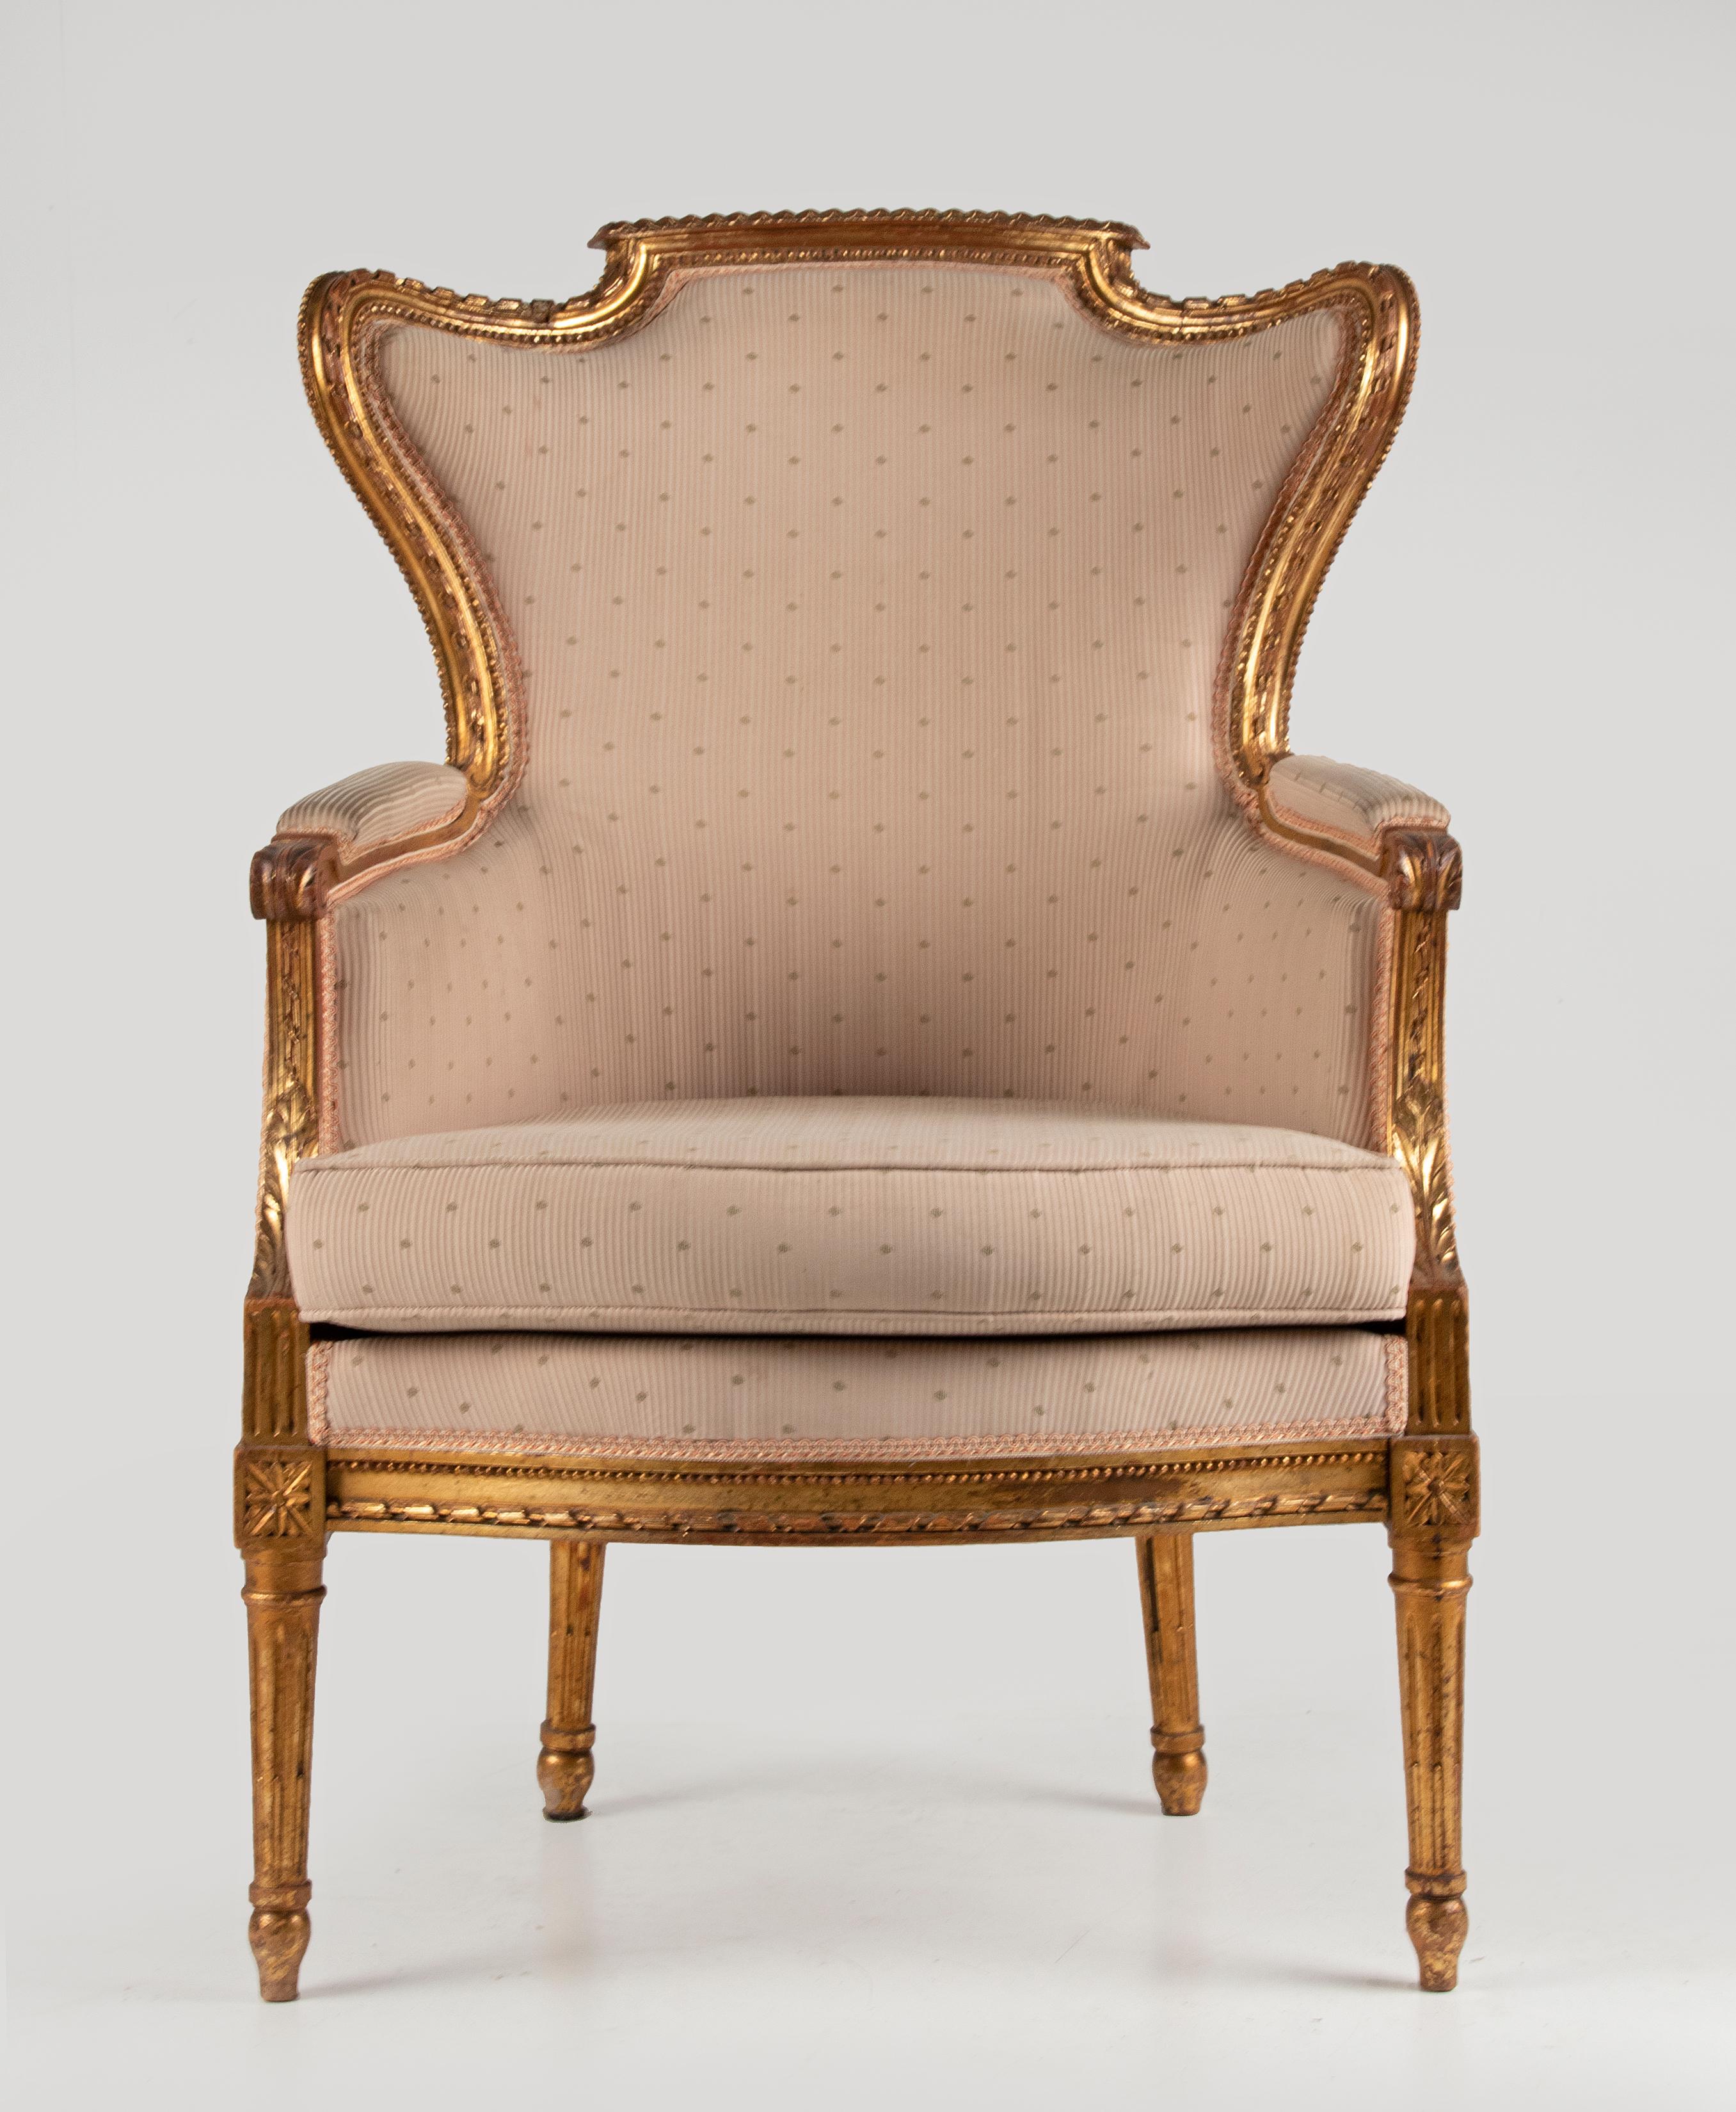 A comfortable Bergère wing chair in Louis XVI style. The chair is made of walnut and patinated with gold paint. Refined carvings, with ribbons, beading rim, acanthus leaf and rosettes. Made in France, circa 1880-1890.